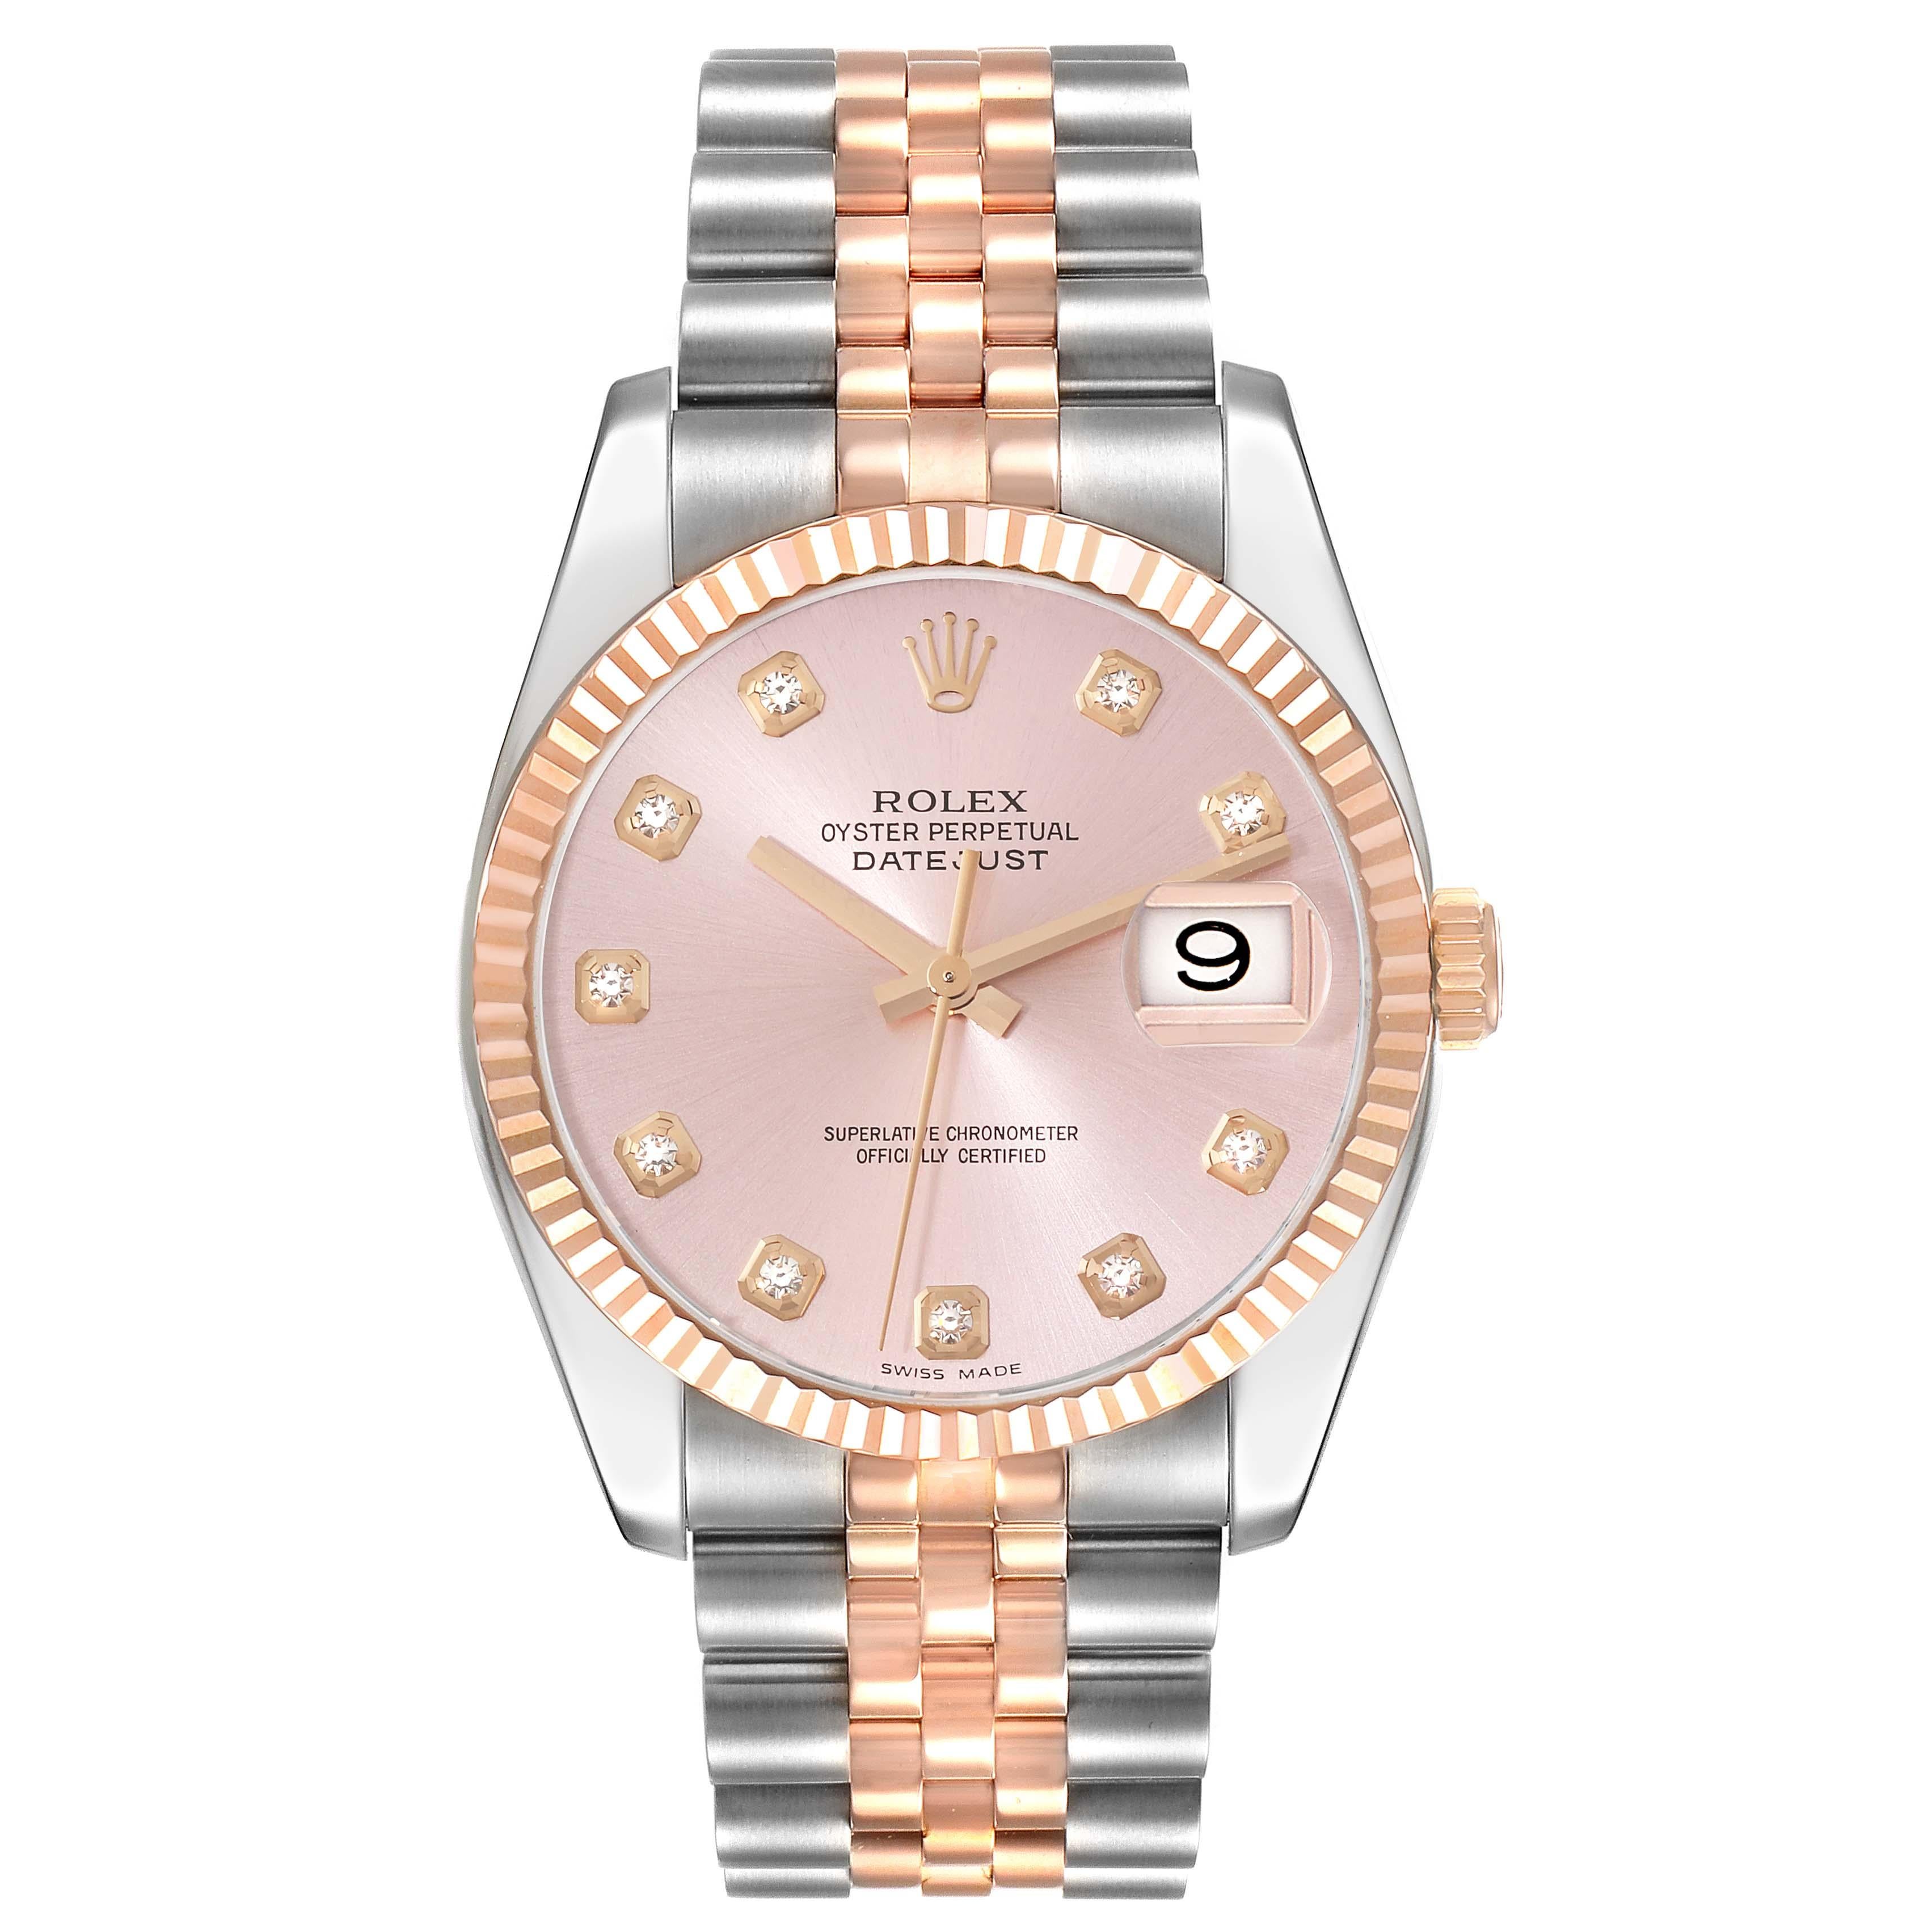 Rolex Datejust Steel Rose Gold Pink Diamond Dial Mens Watch 116231 For Sale 1